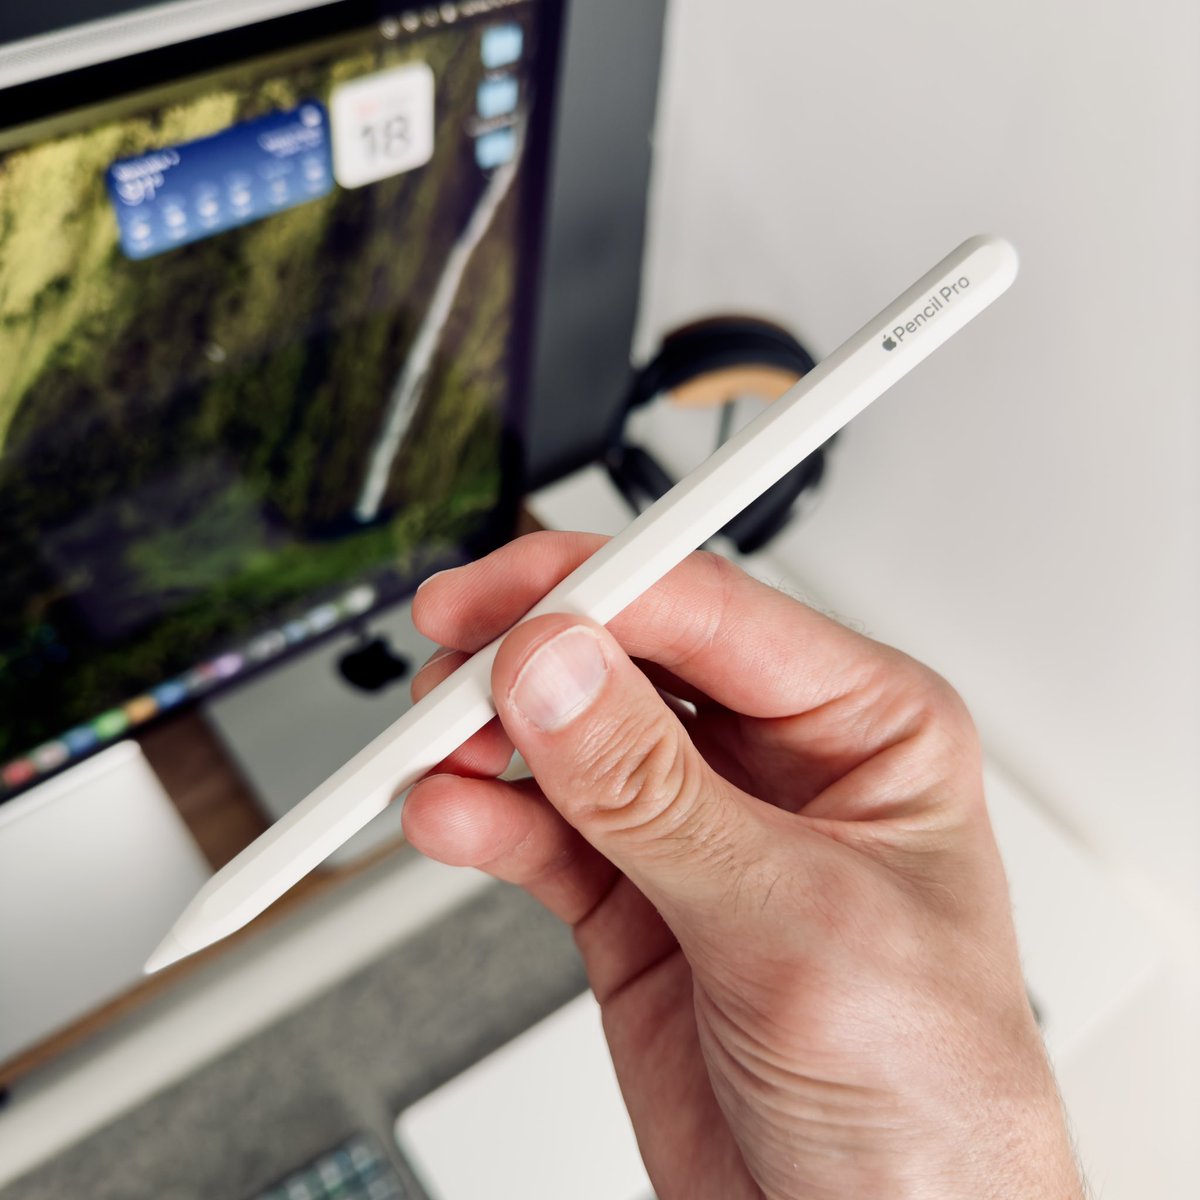 Did you get the new Apple Pencil Pro?